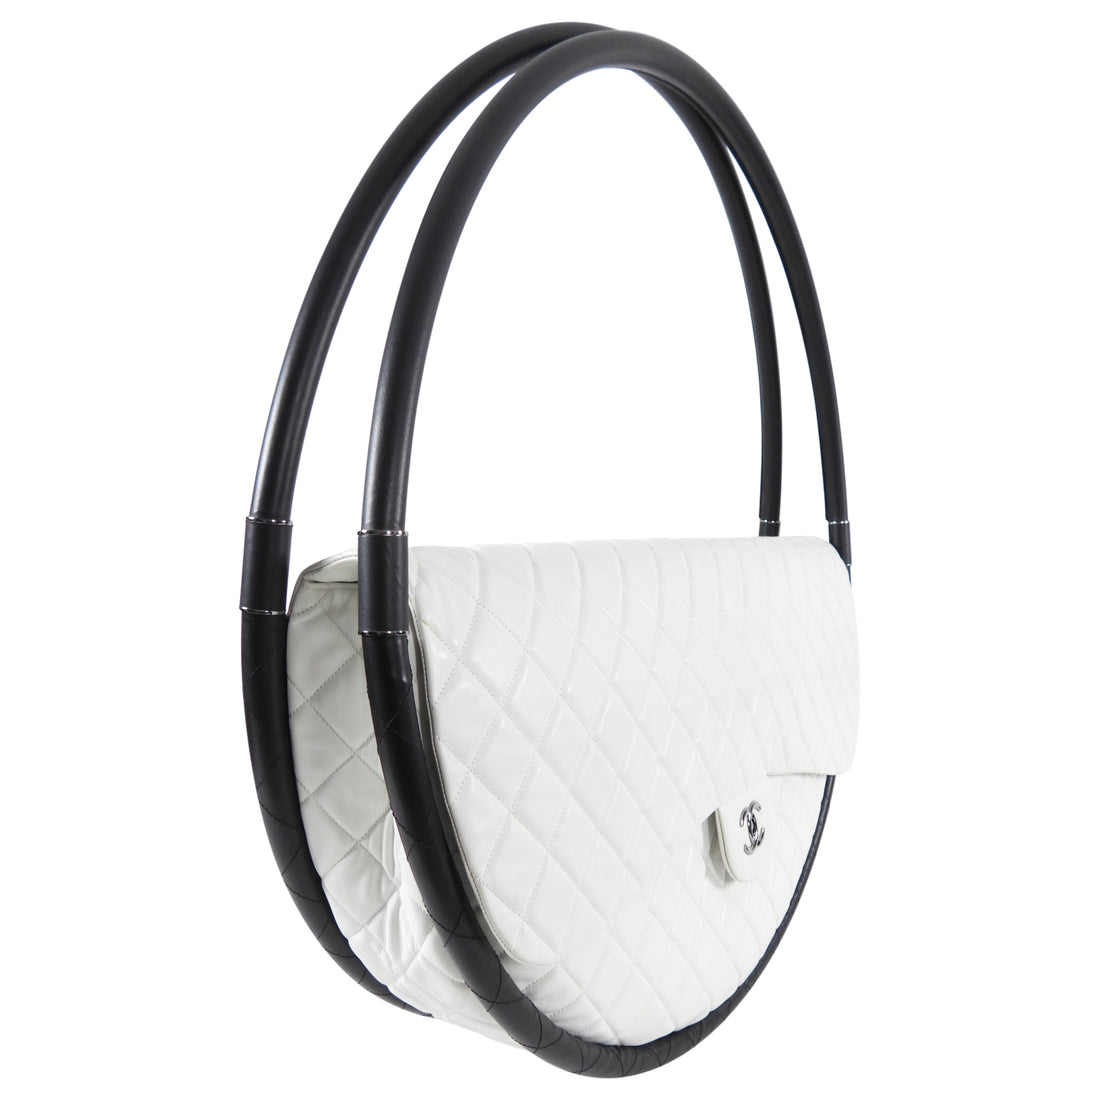 This Chanel hula hoop bag is SO iconic 💅 Let us know what other